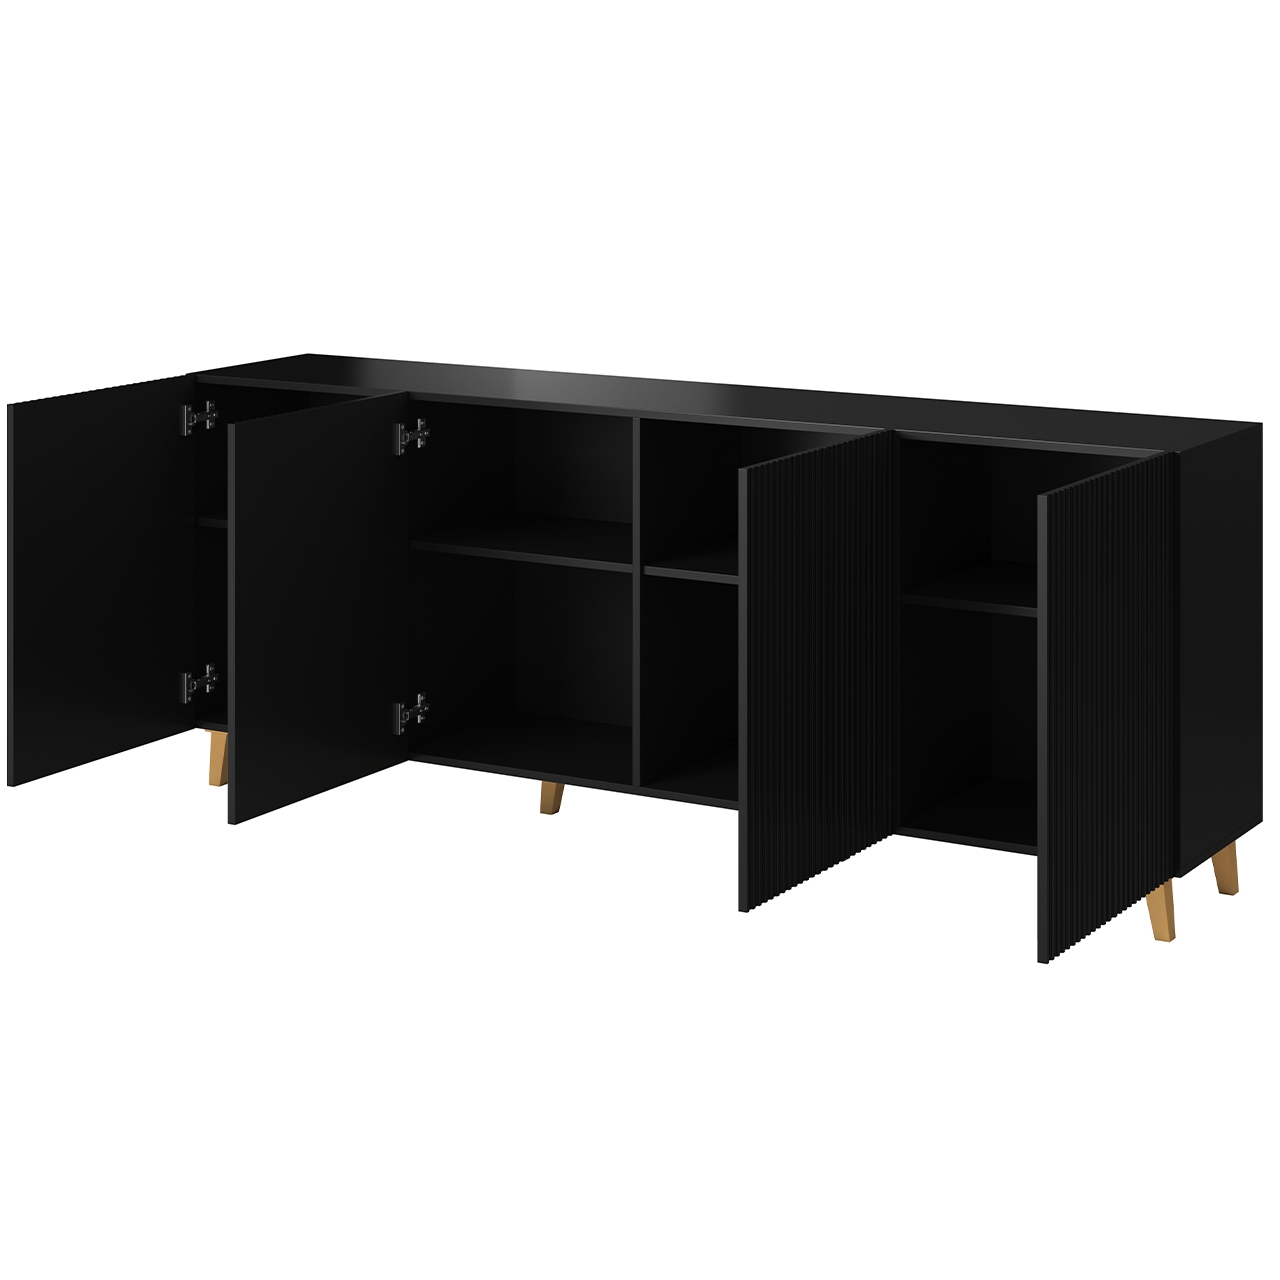 Storage cabinet PAFOS 200 black